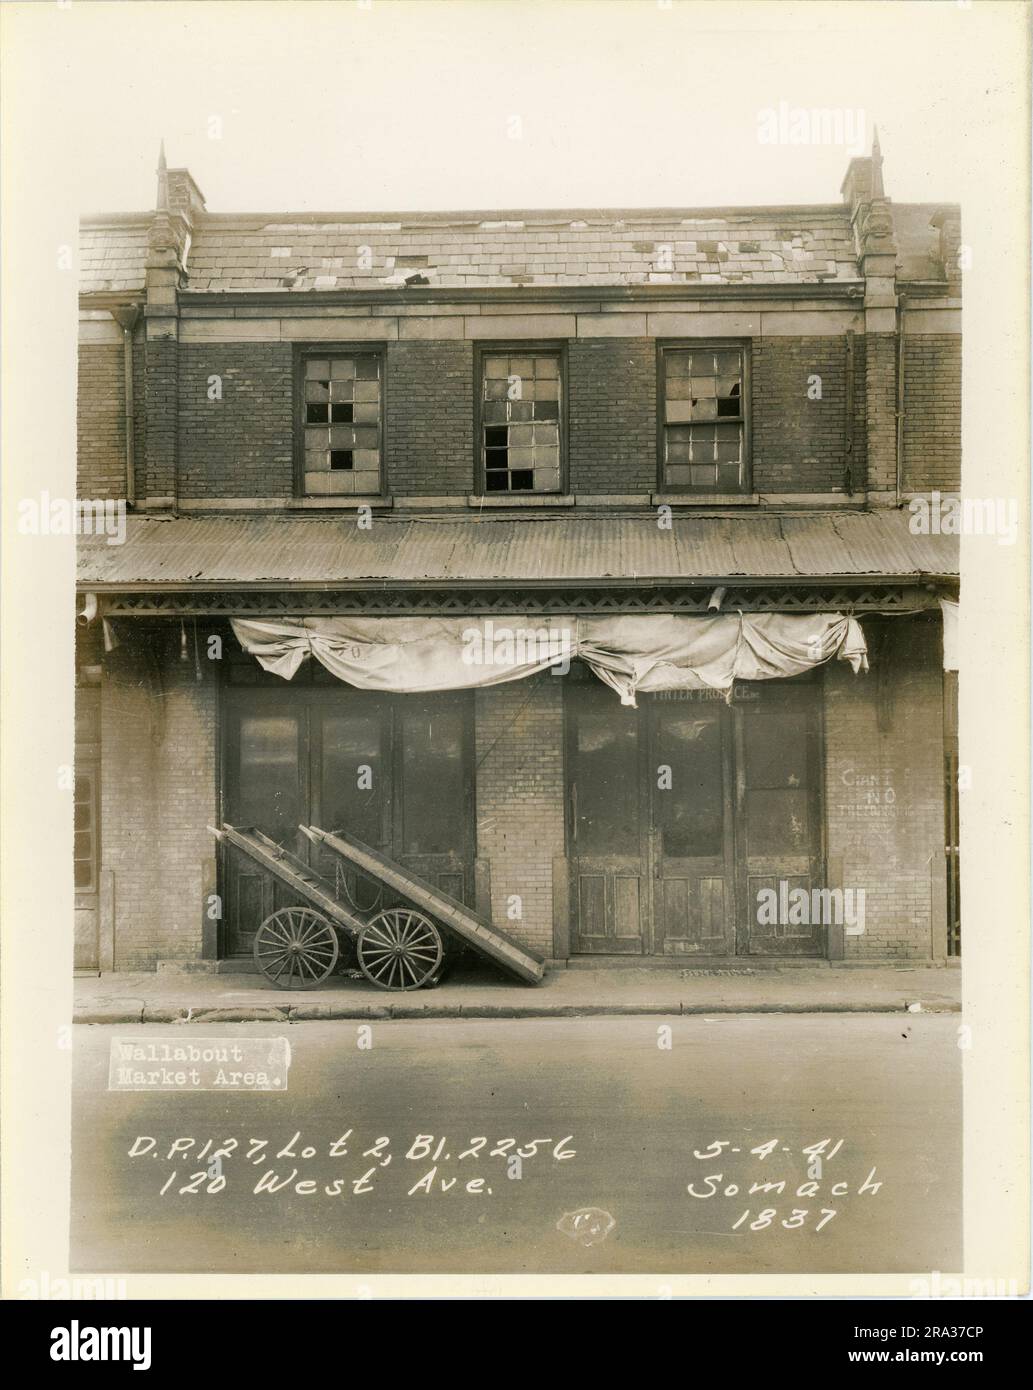 Photograph of exterior of lot 2, Bl. 2256, 120 West Ave, D.P. 127. Depicts market building exterior with sign for Tinter Produce, Inc.. Stock Photo